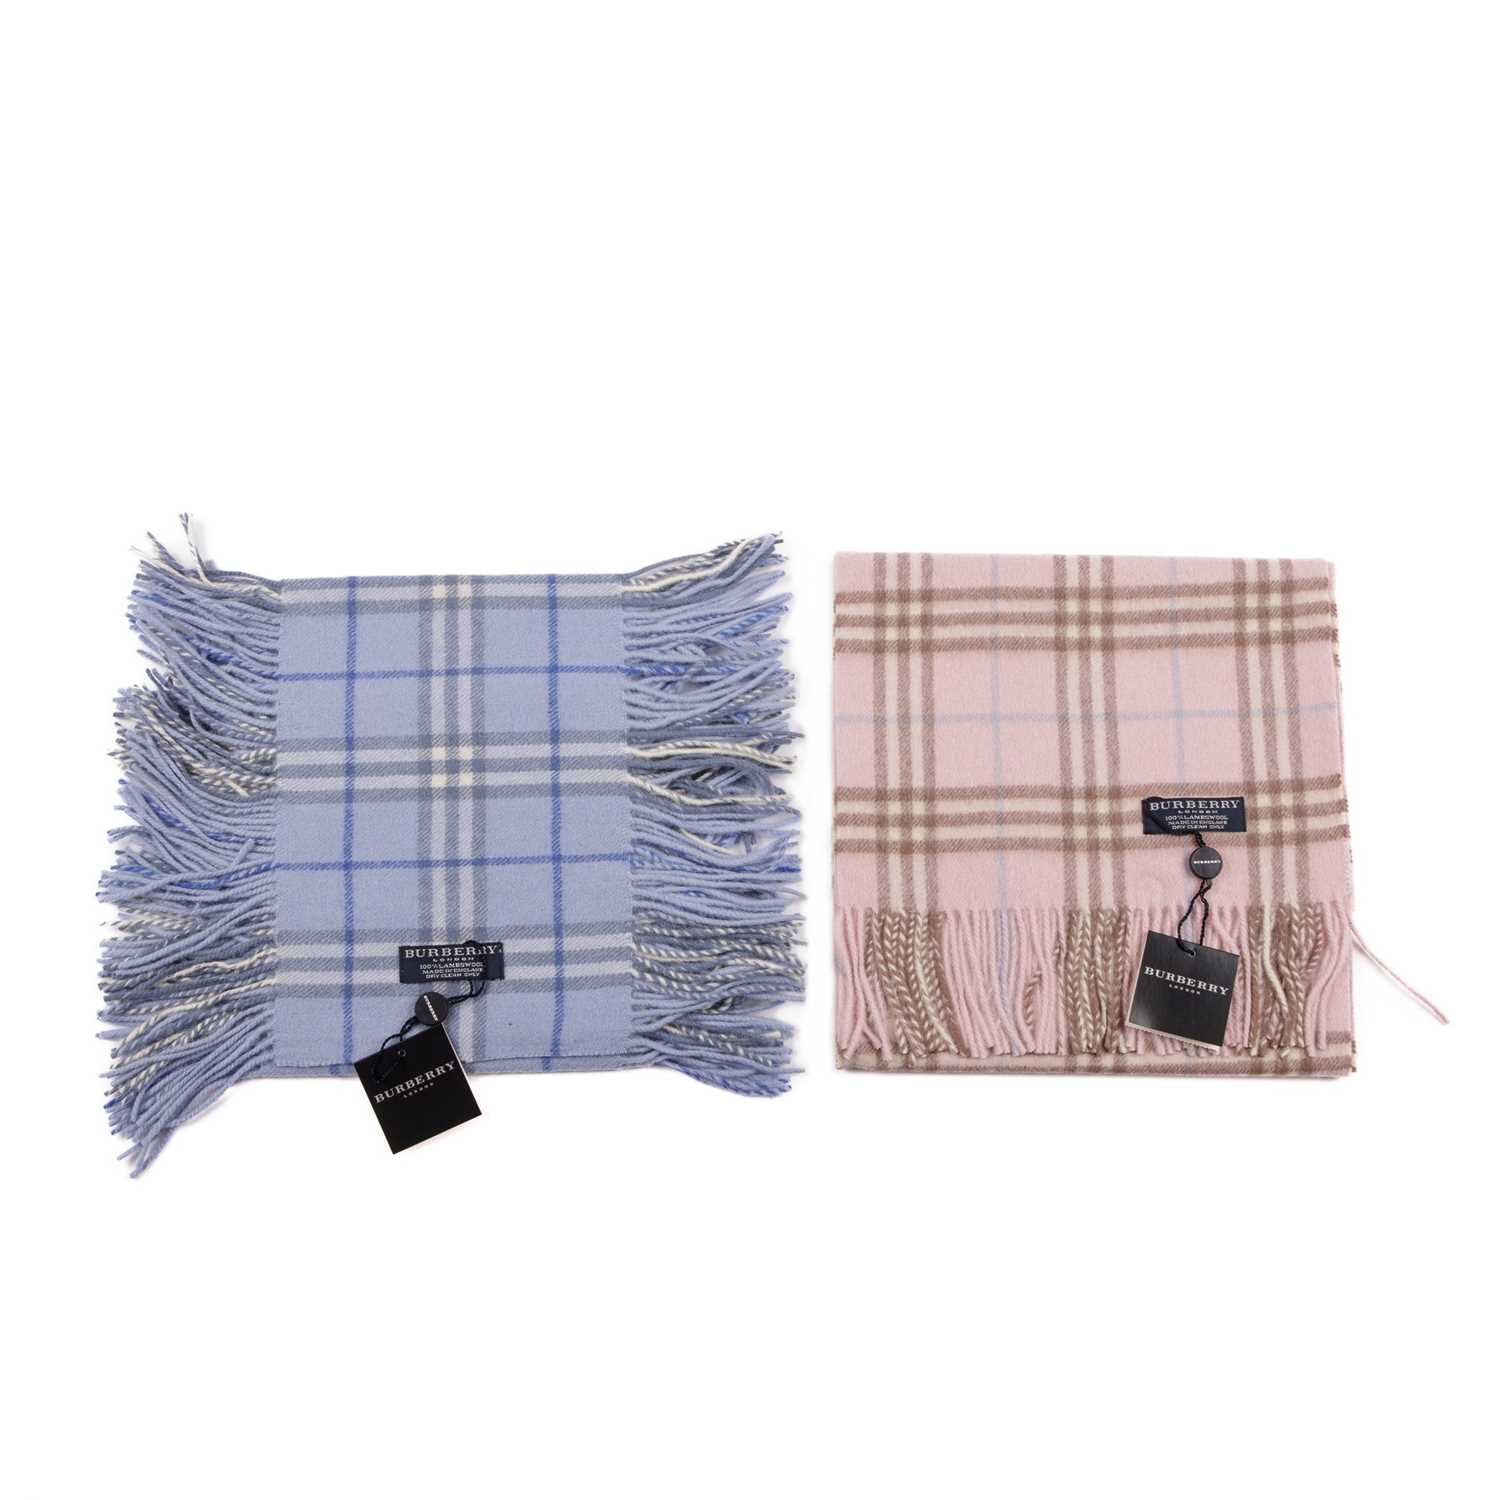 Burberry, two Nova Check lambswool scarves, to include a rose pink scarf with fringe detailing at - Image 2 of 4